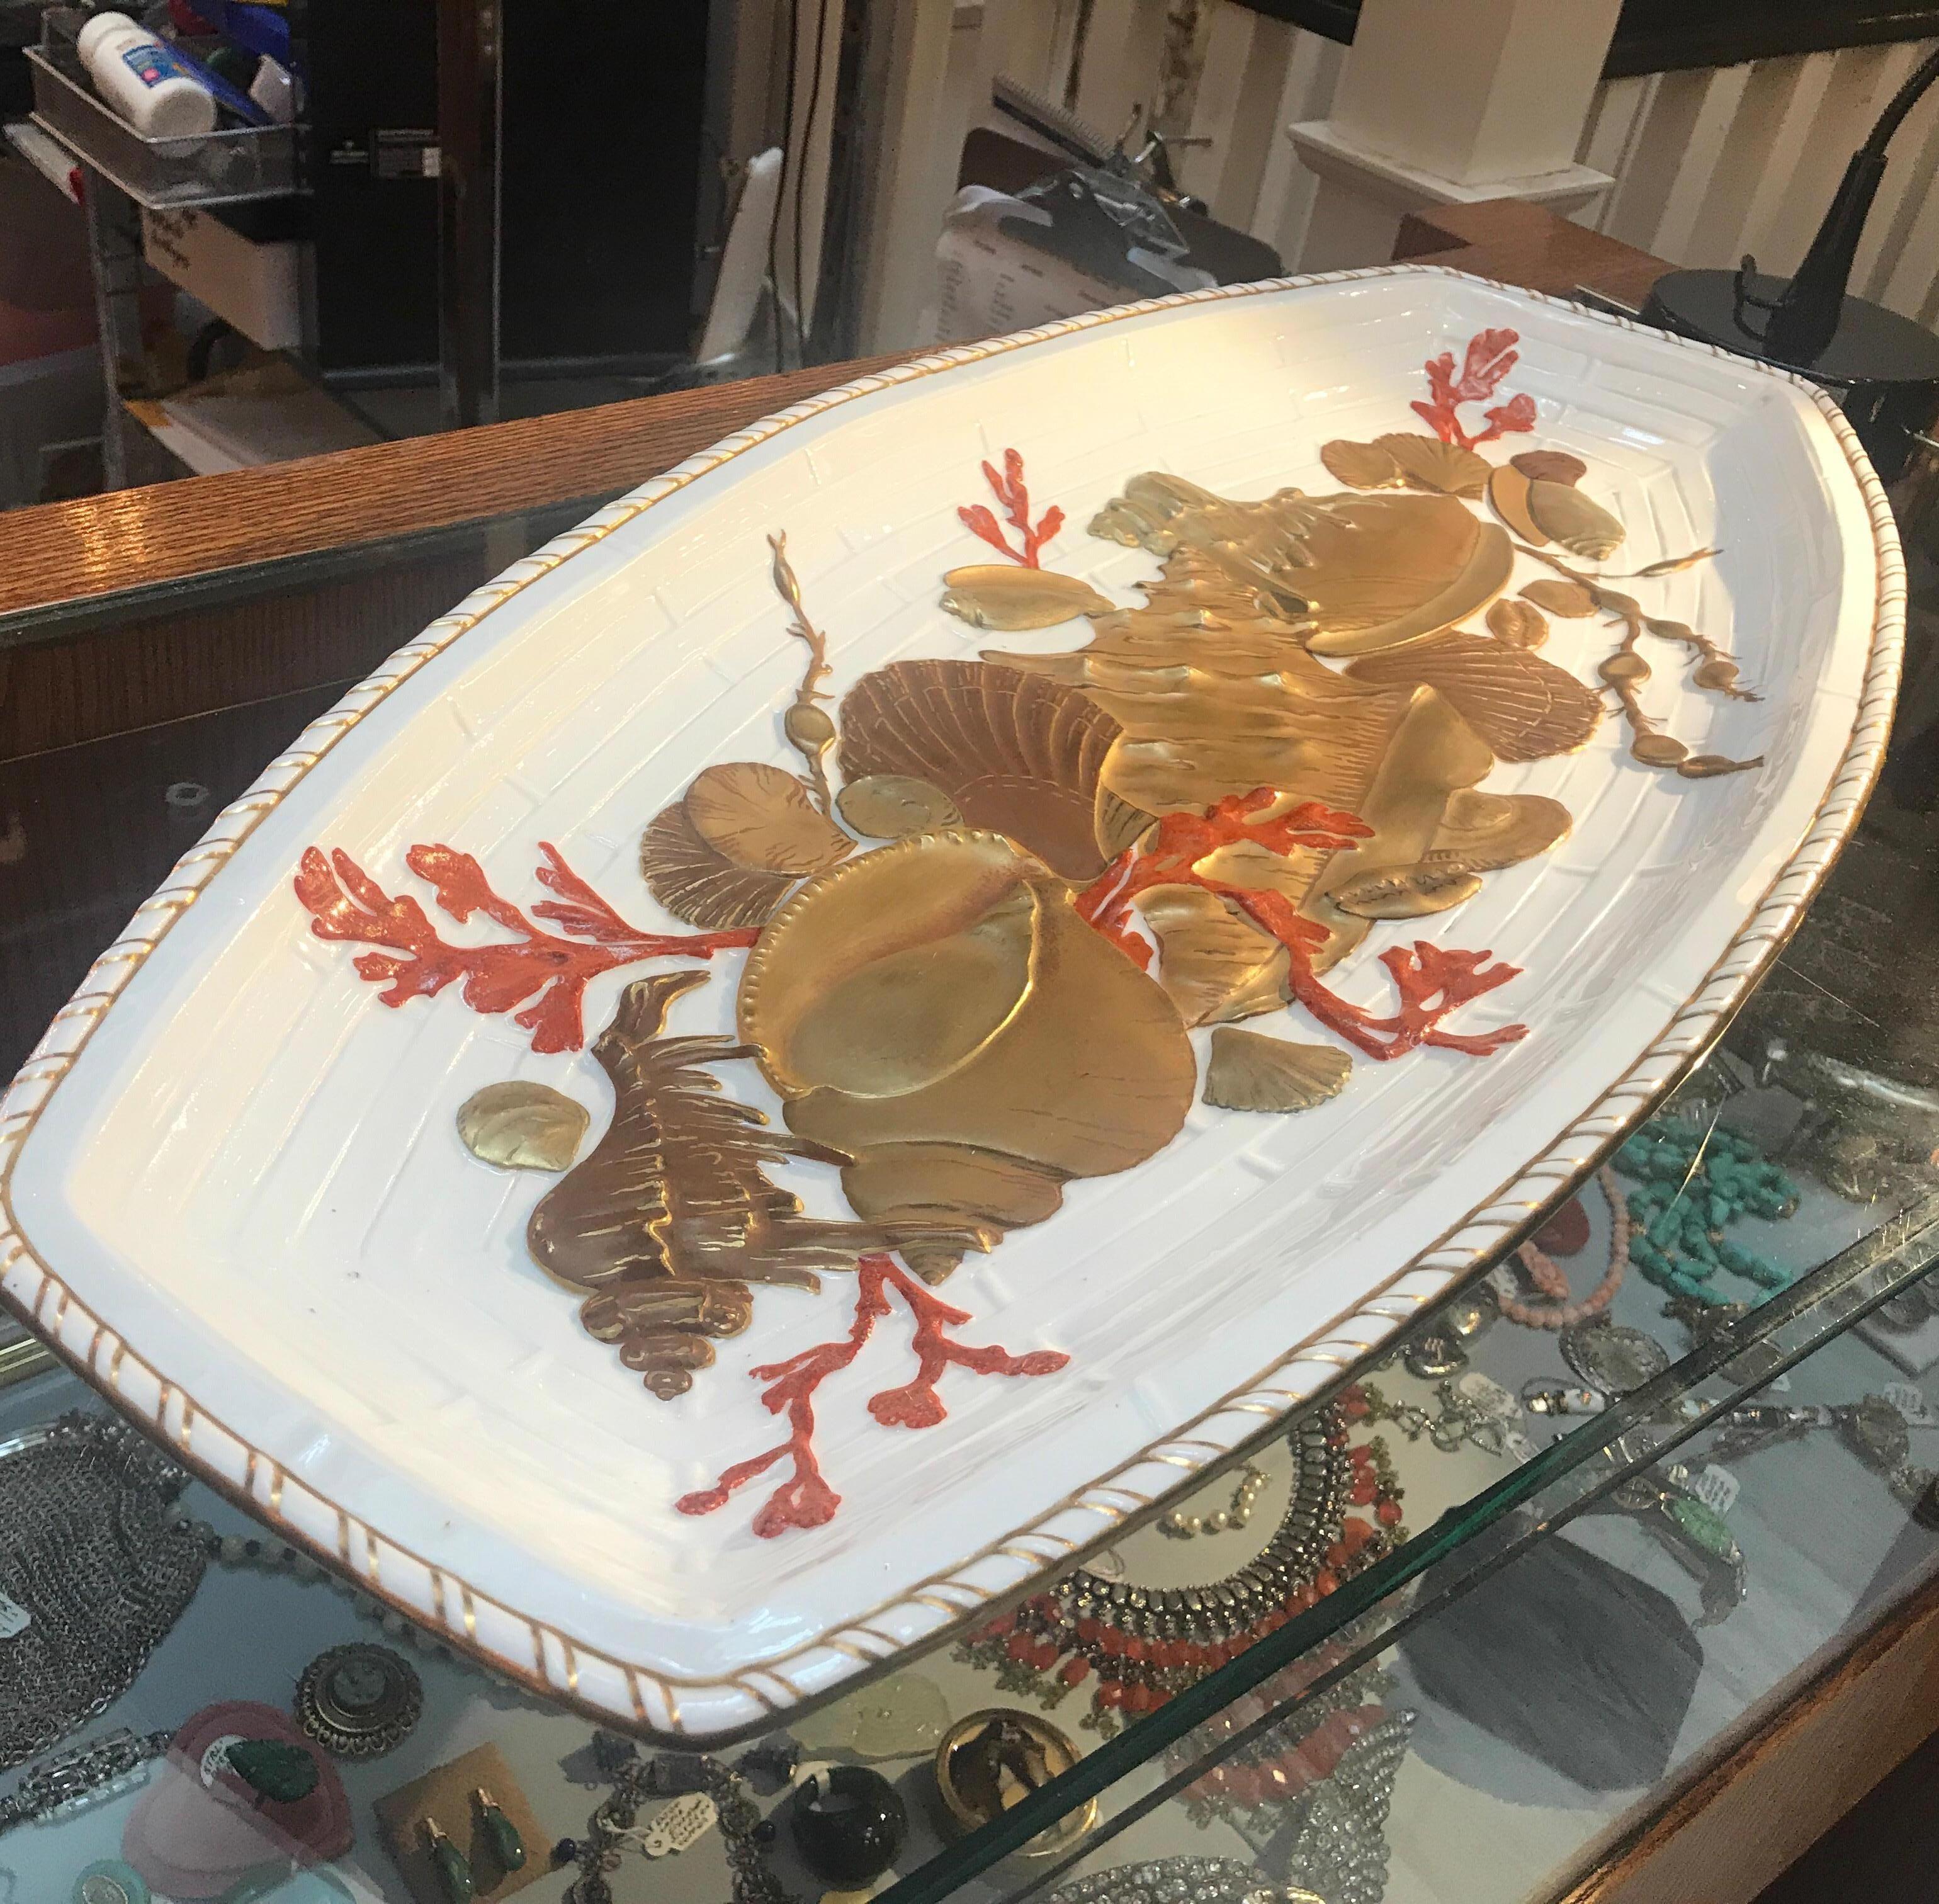 Fabulous and unusual English porcelain hand painted fish platter by Wedgwood 1880s the white glazed porcelain with three color gilt shell decoration with orange red coral highlights. The bowl of the platter with highly dimensional assortment of